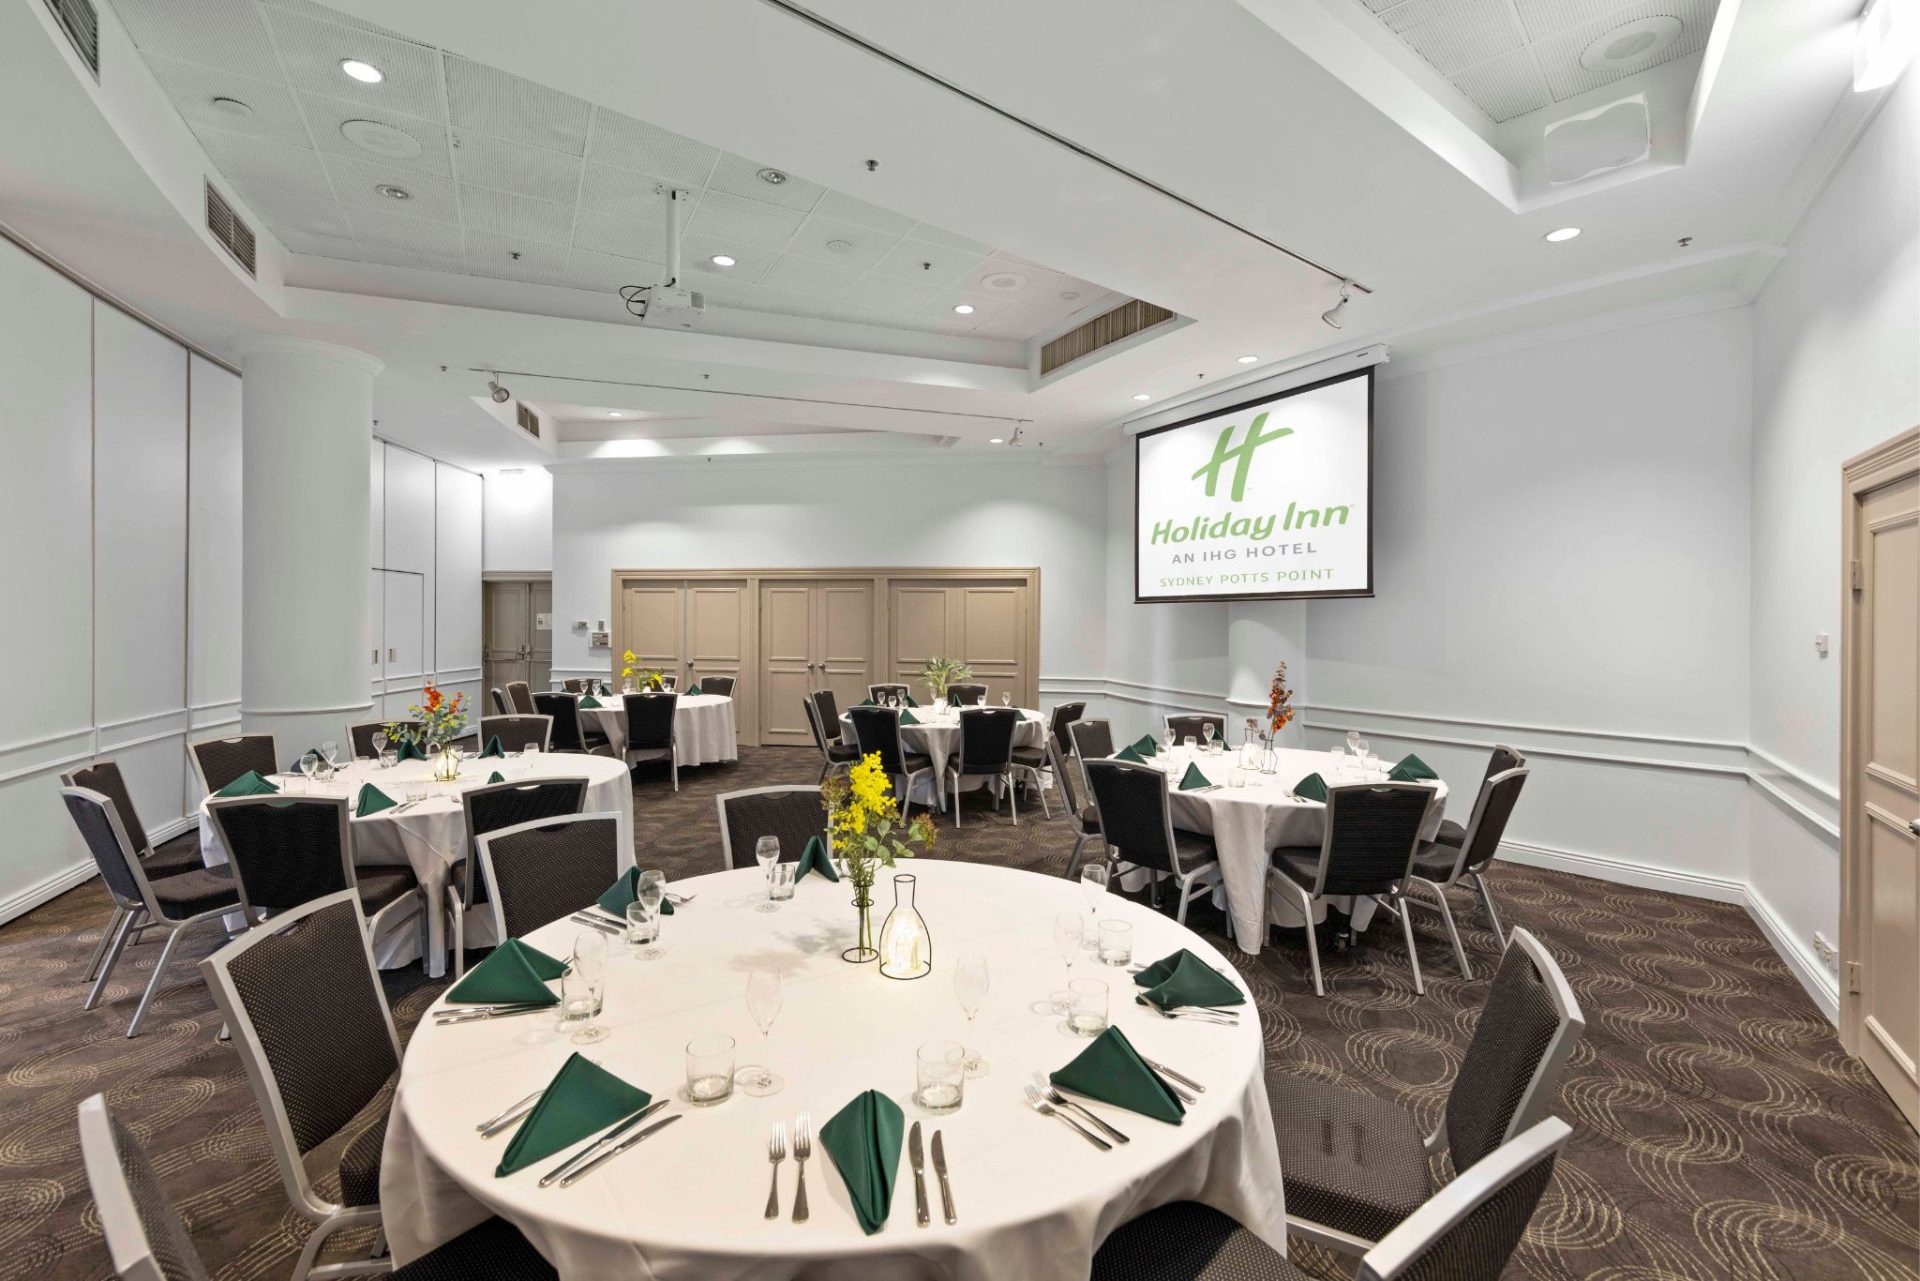 Banksia meeting room at Holiday Inn Sydney Potts Point